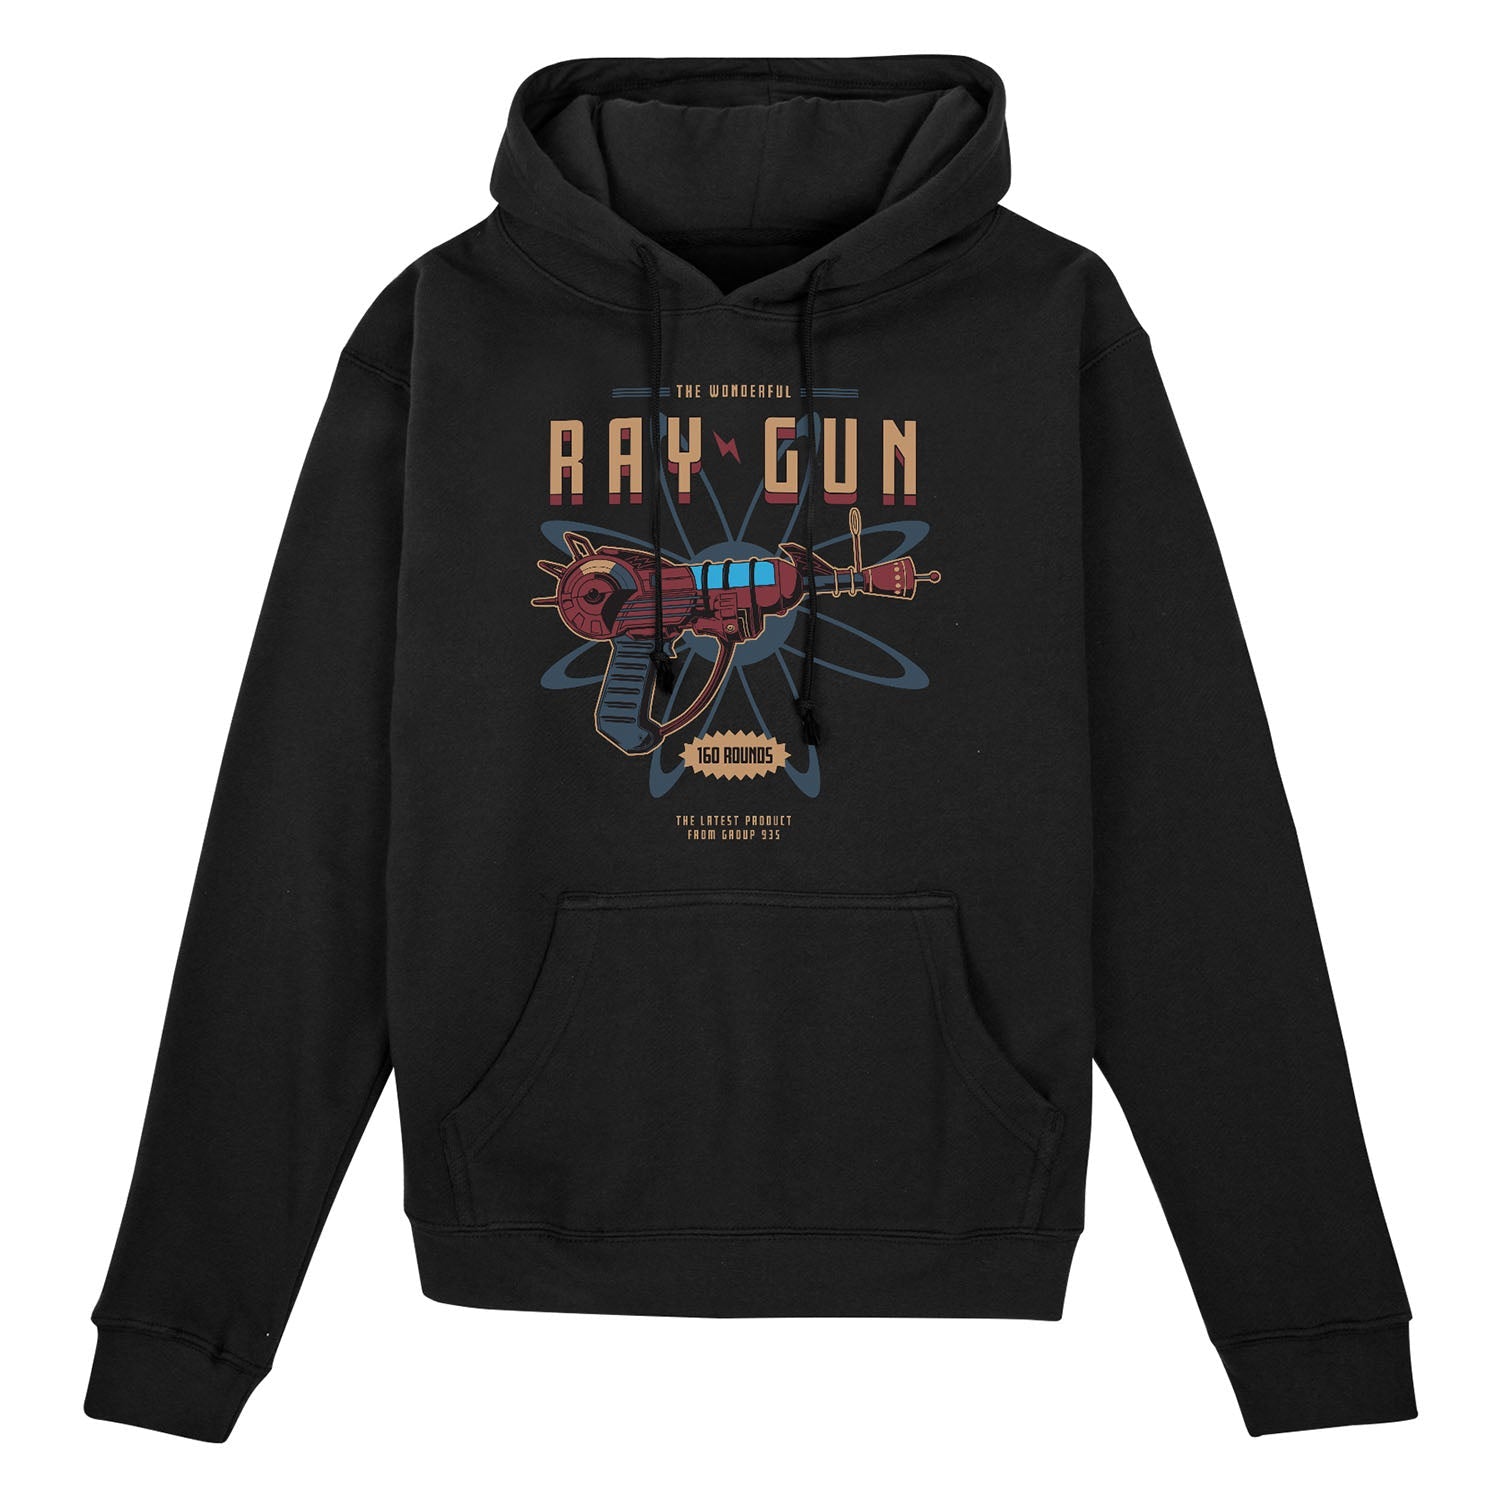 Call of Duty Black Raygun Hoodie - Front View